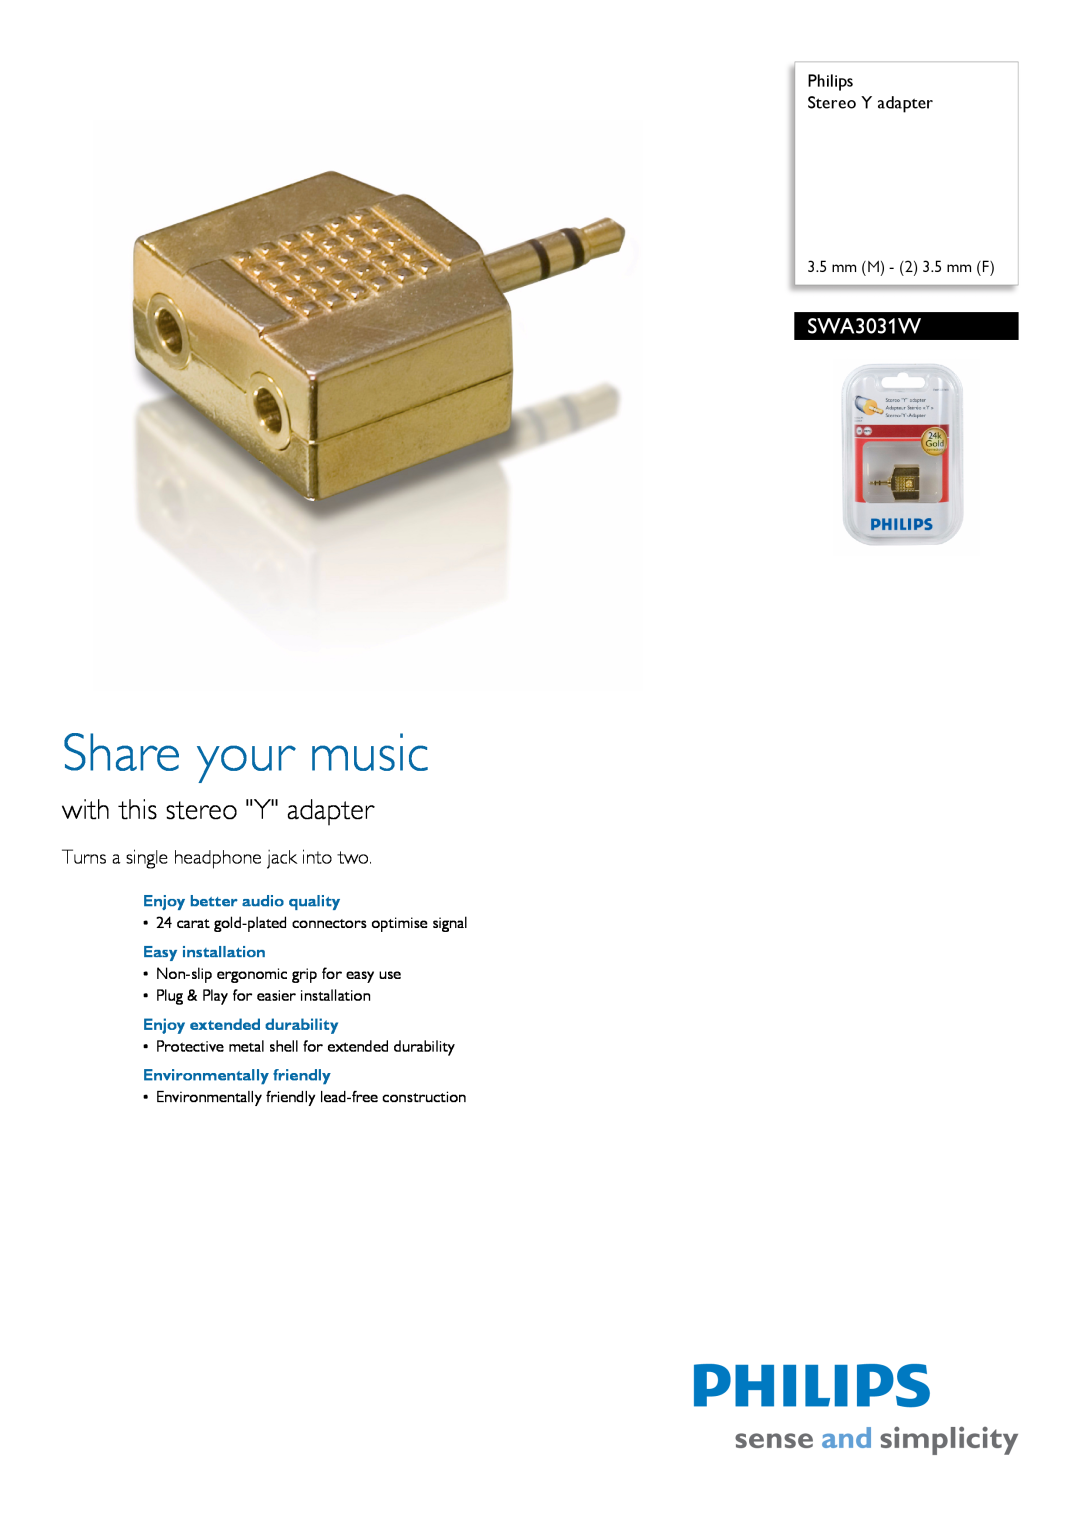 Philips SWA3031W/10 manual Philips Stereo Y adapter, Enjoy better audio quality, Easy installation, Share your music 